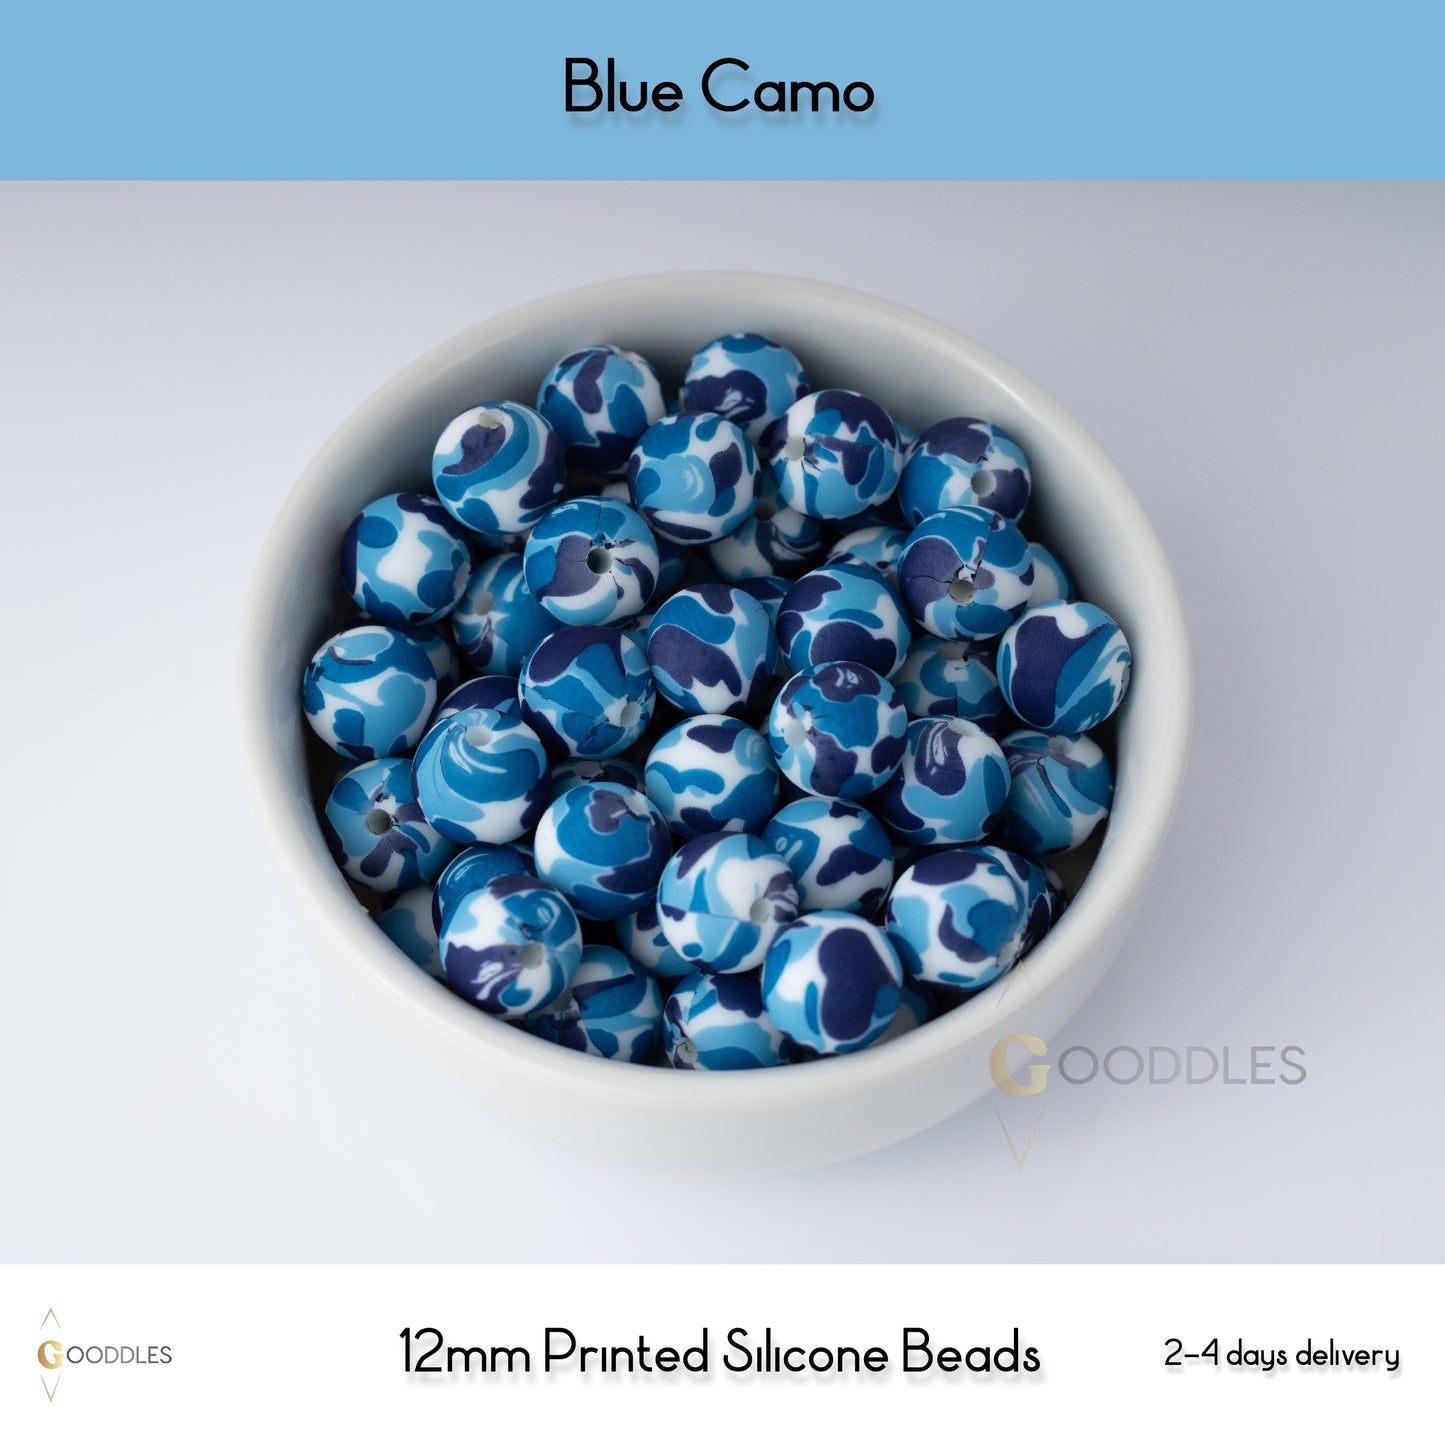 5pcs, Blue Camo Silicone Beads Printed Round Silicone Beads